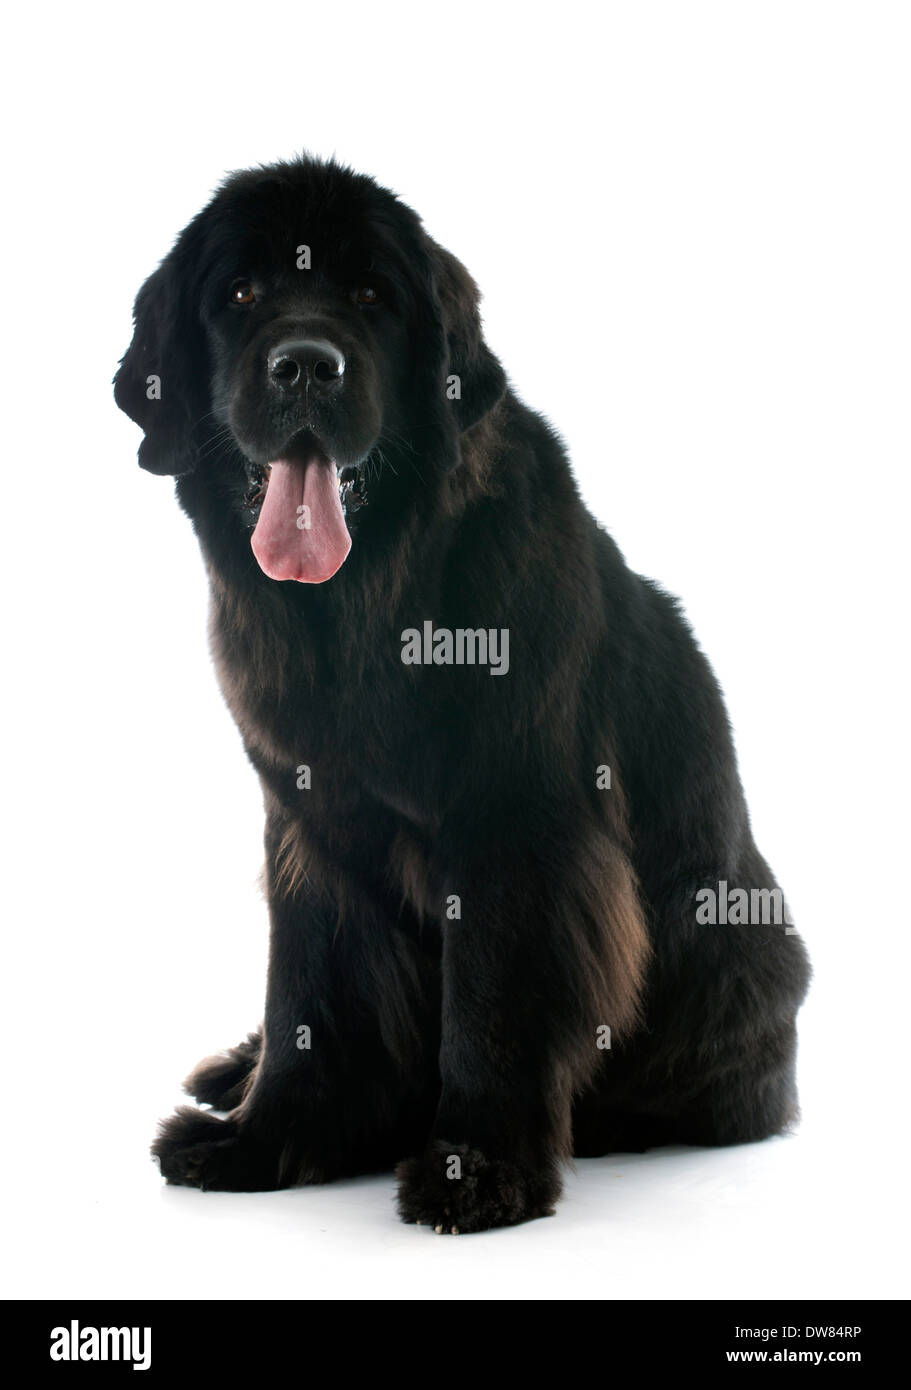 Newfoundland dog in front of white background Banque D'Images